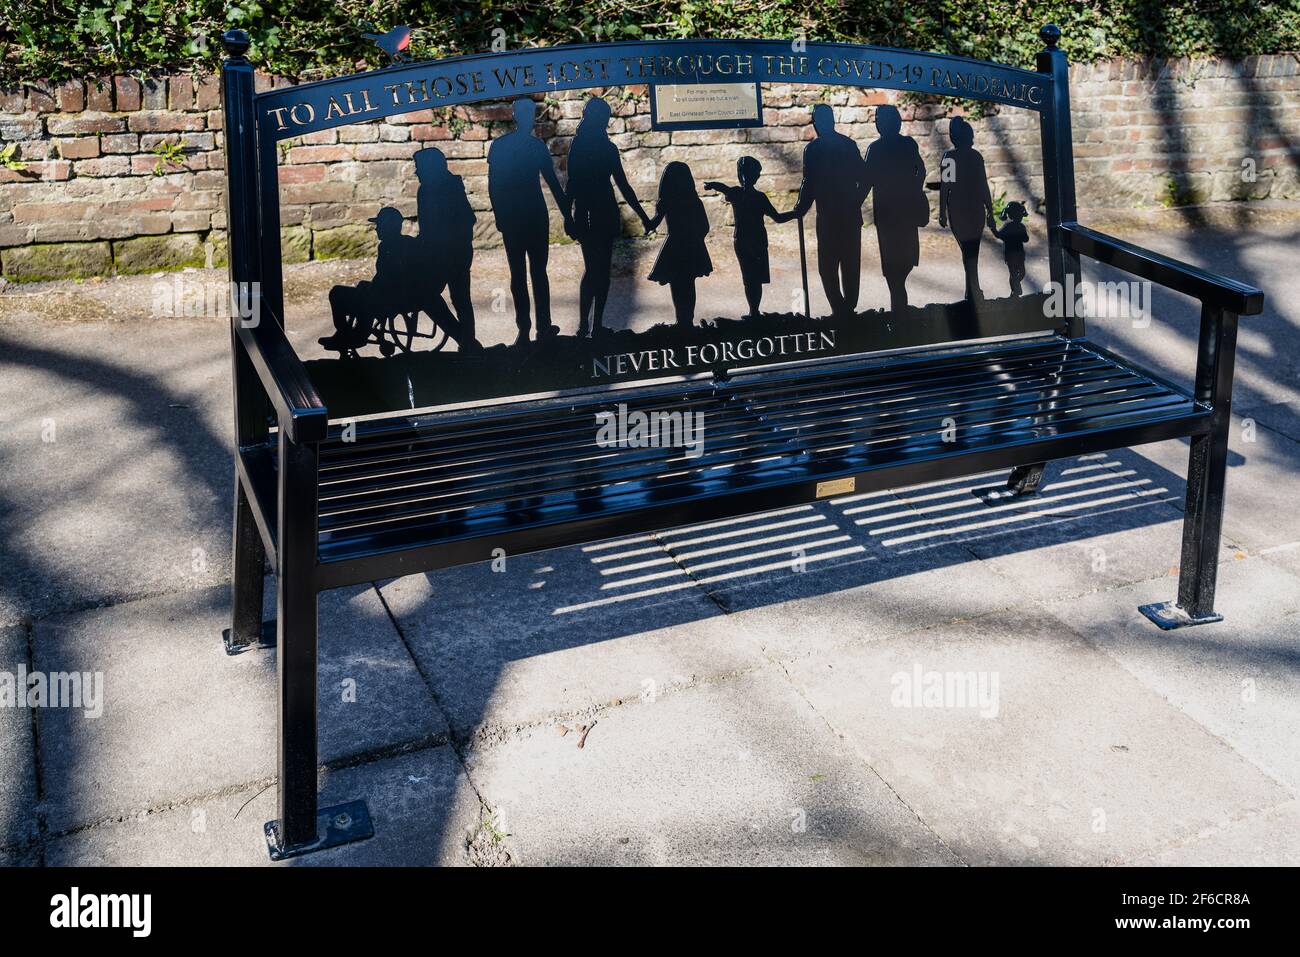 EAST GRINSTEAD, WEST SUSSEX, UK - MARCH 29 : A commemorative bench to Covid 19 victims in East Grinstead, West Sussex on March 29, 2021 Stock Photo